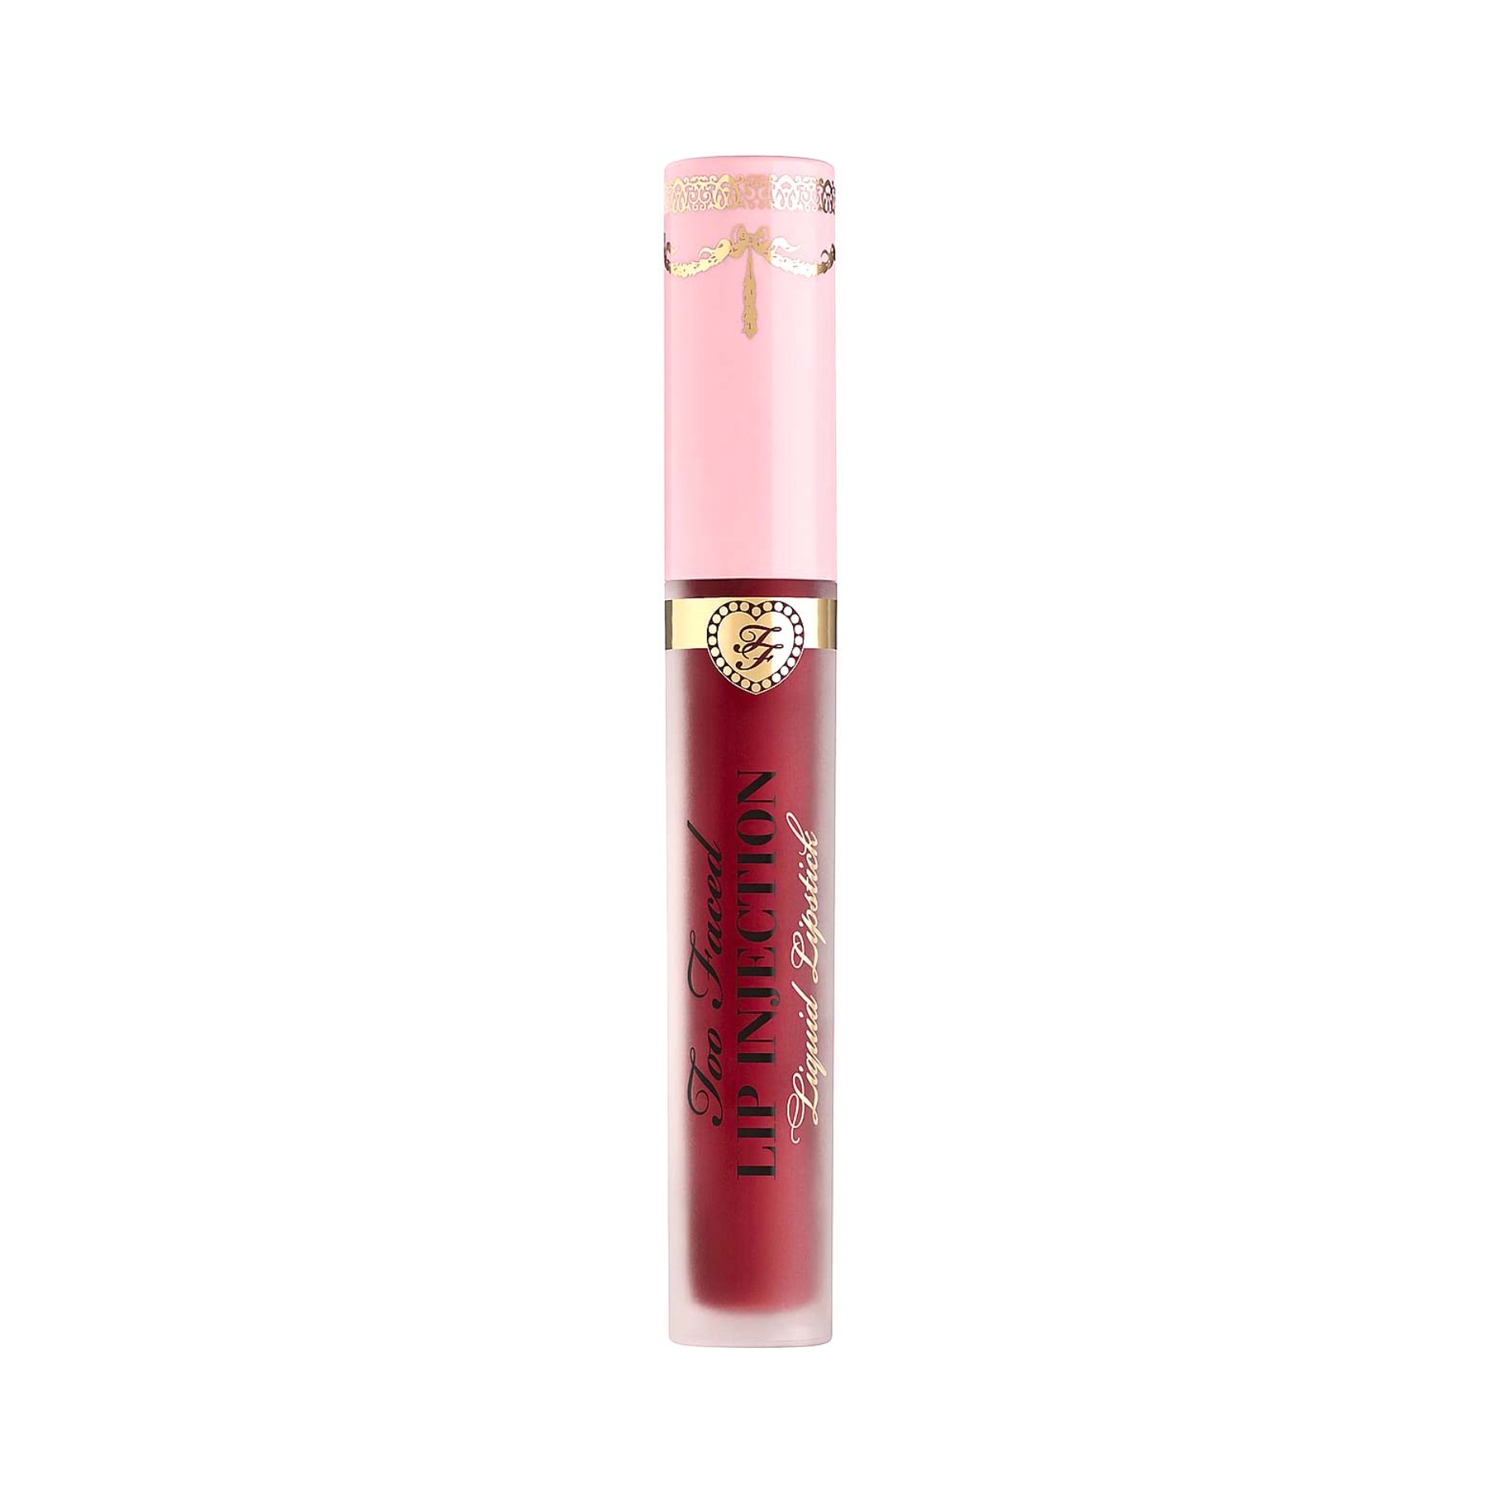 Too Faced | Too Faced Lip Injection Liquid Lipstick - Boom Boom Pow (3ml)